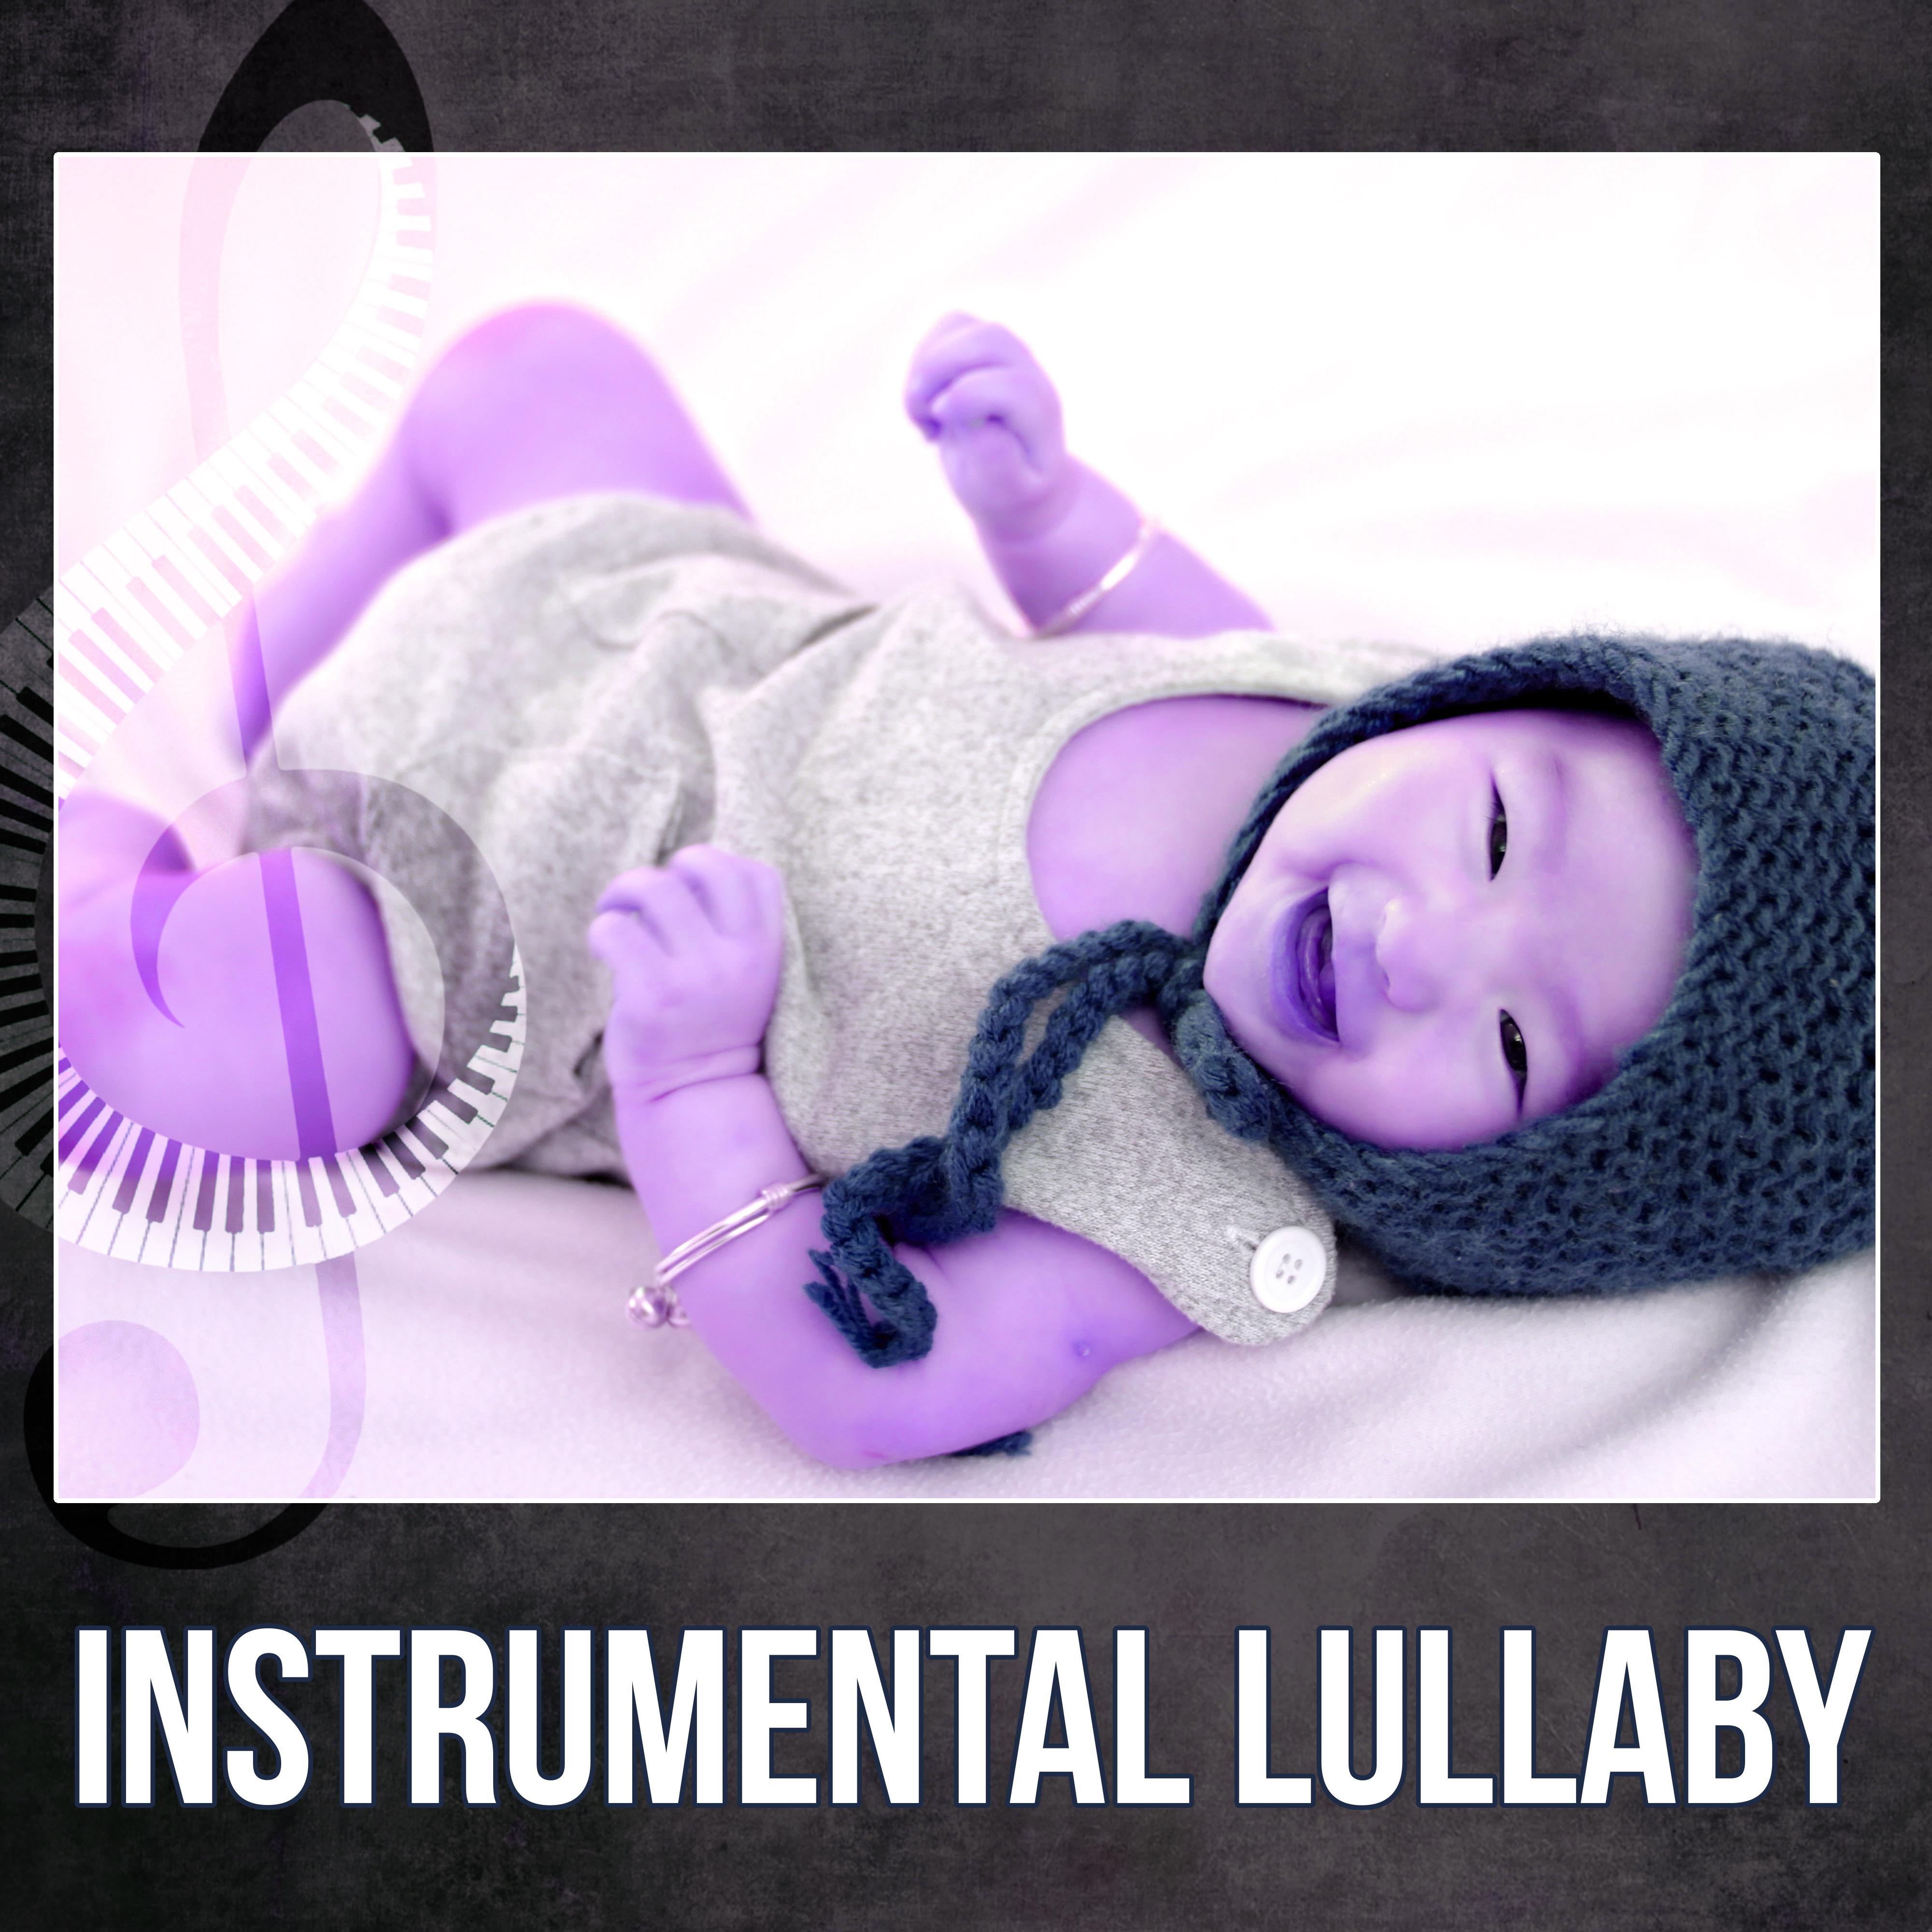 Instrumental Lullaby - Sleep My Baby, New Age Soothing Sounds for Newborns to Relax, Sleeping Music for Babies and Infants